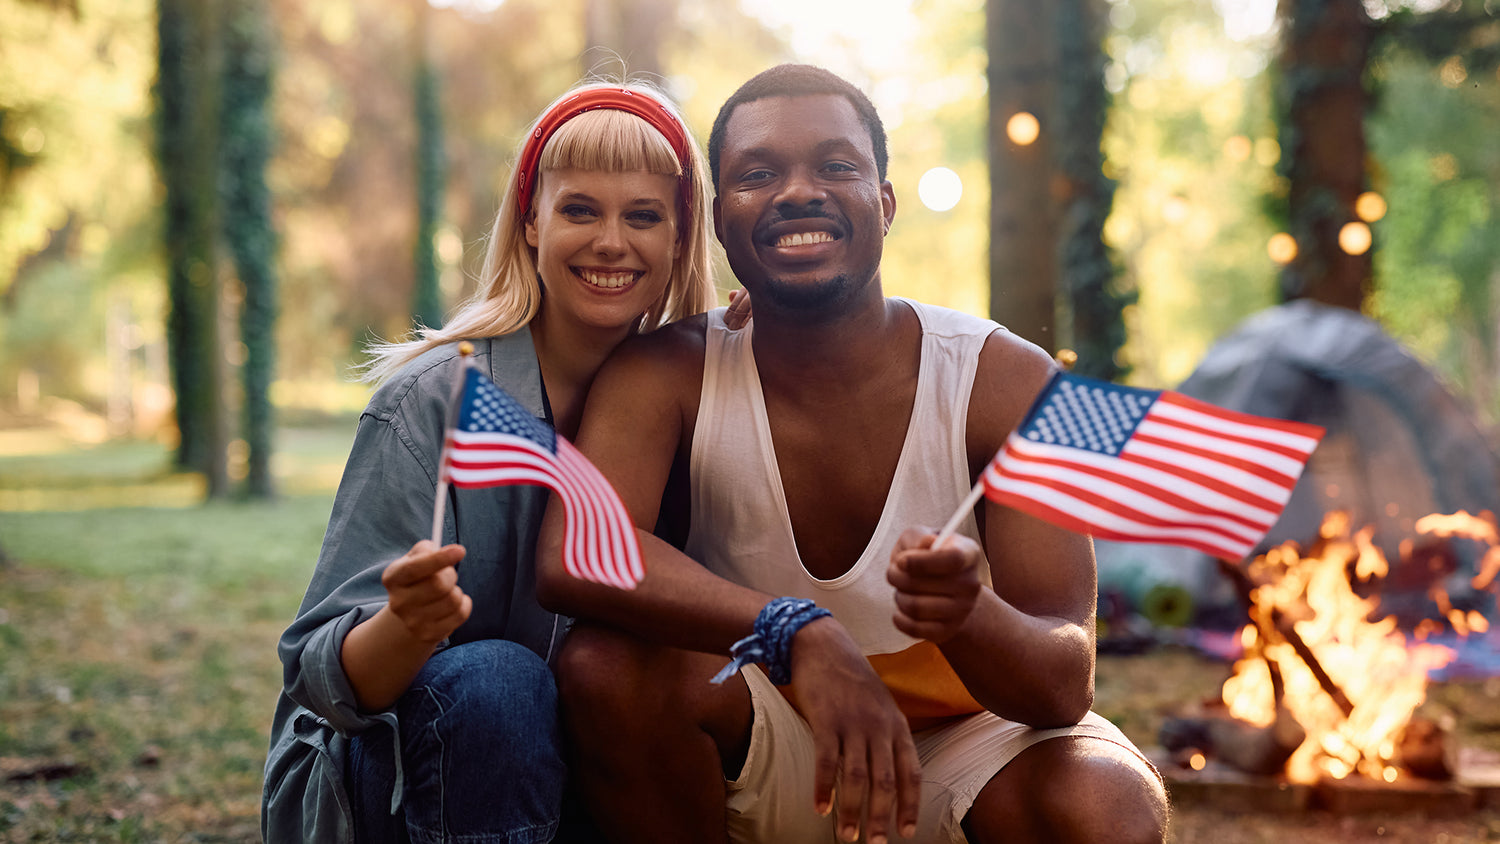 4 Eco-Friendly Ways to Celebrate Sustainably on the 4th of July